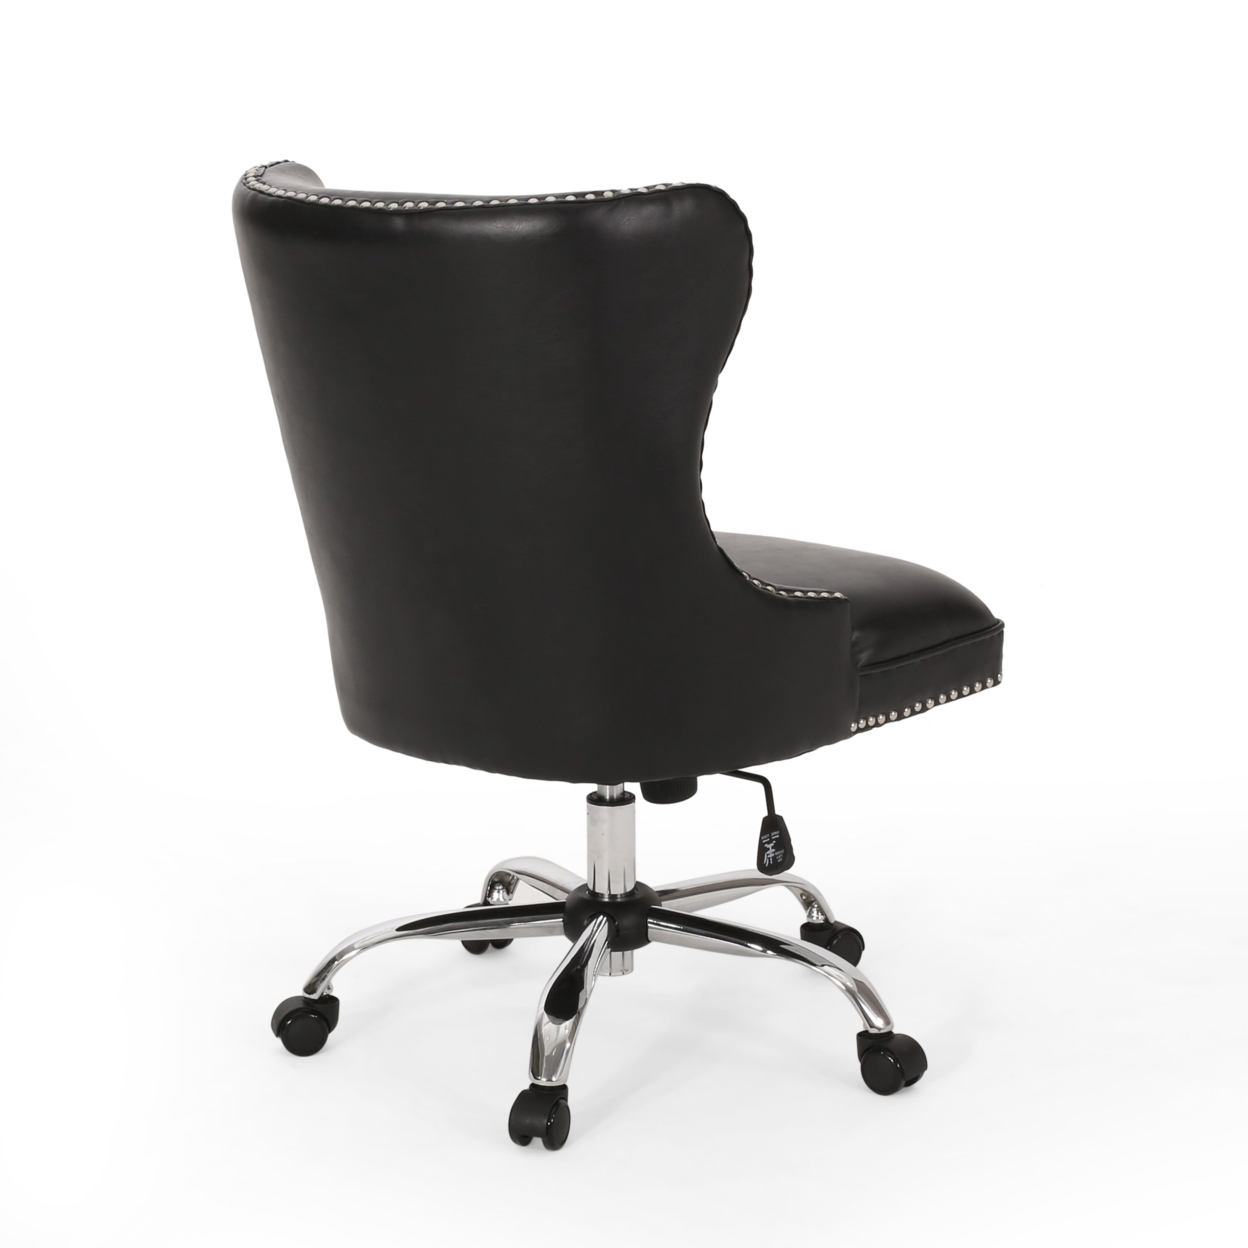 Abagail Contemporary Tufted Swivel Office Chair - Midnight